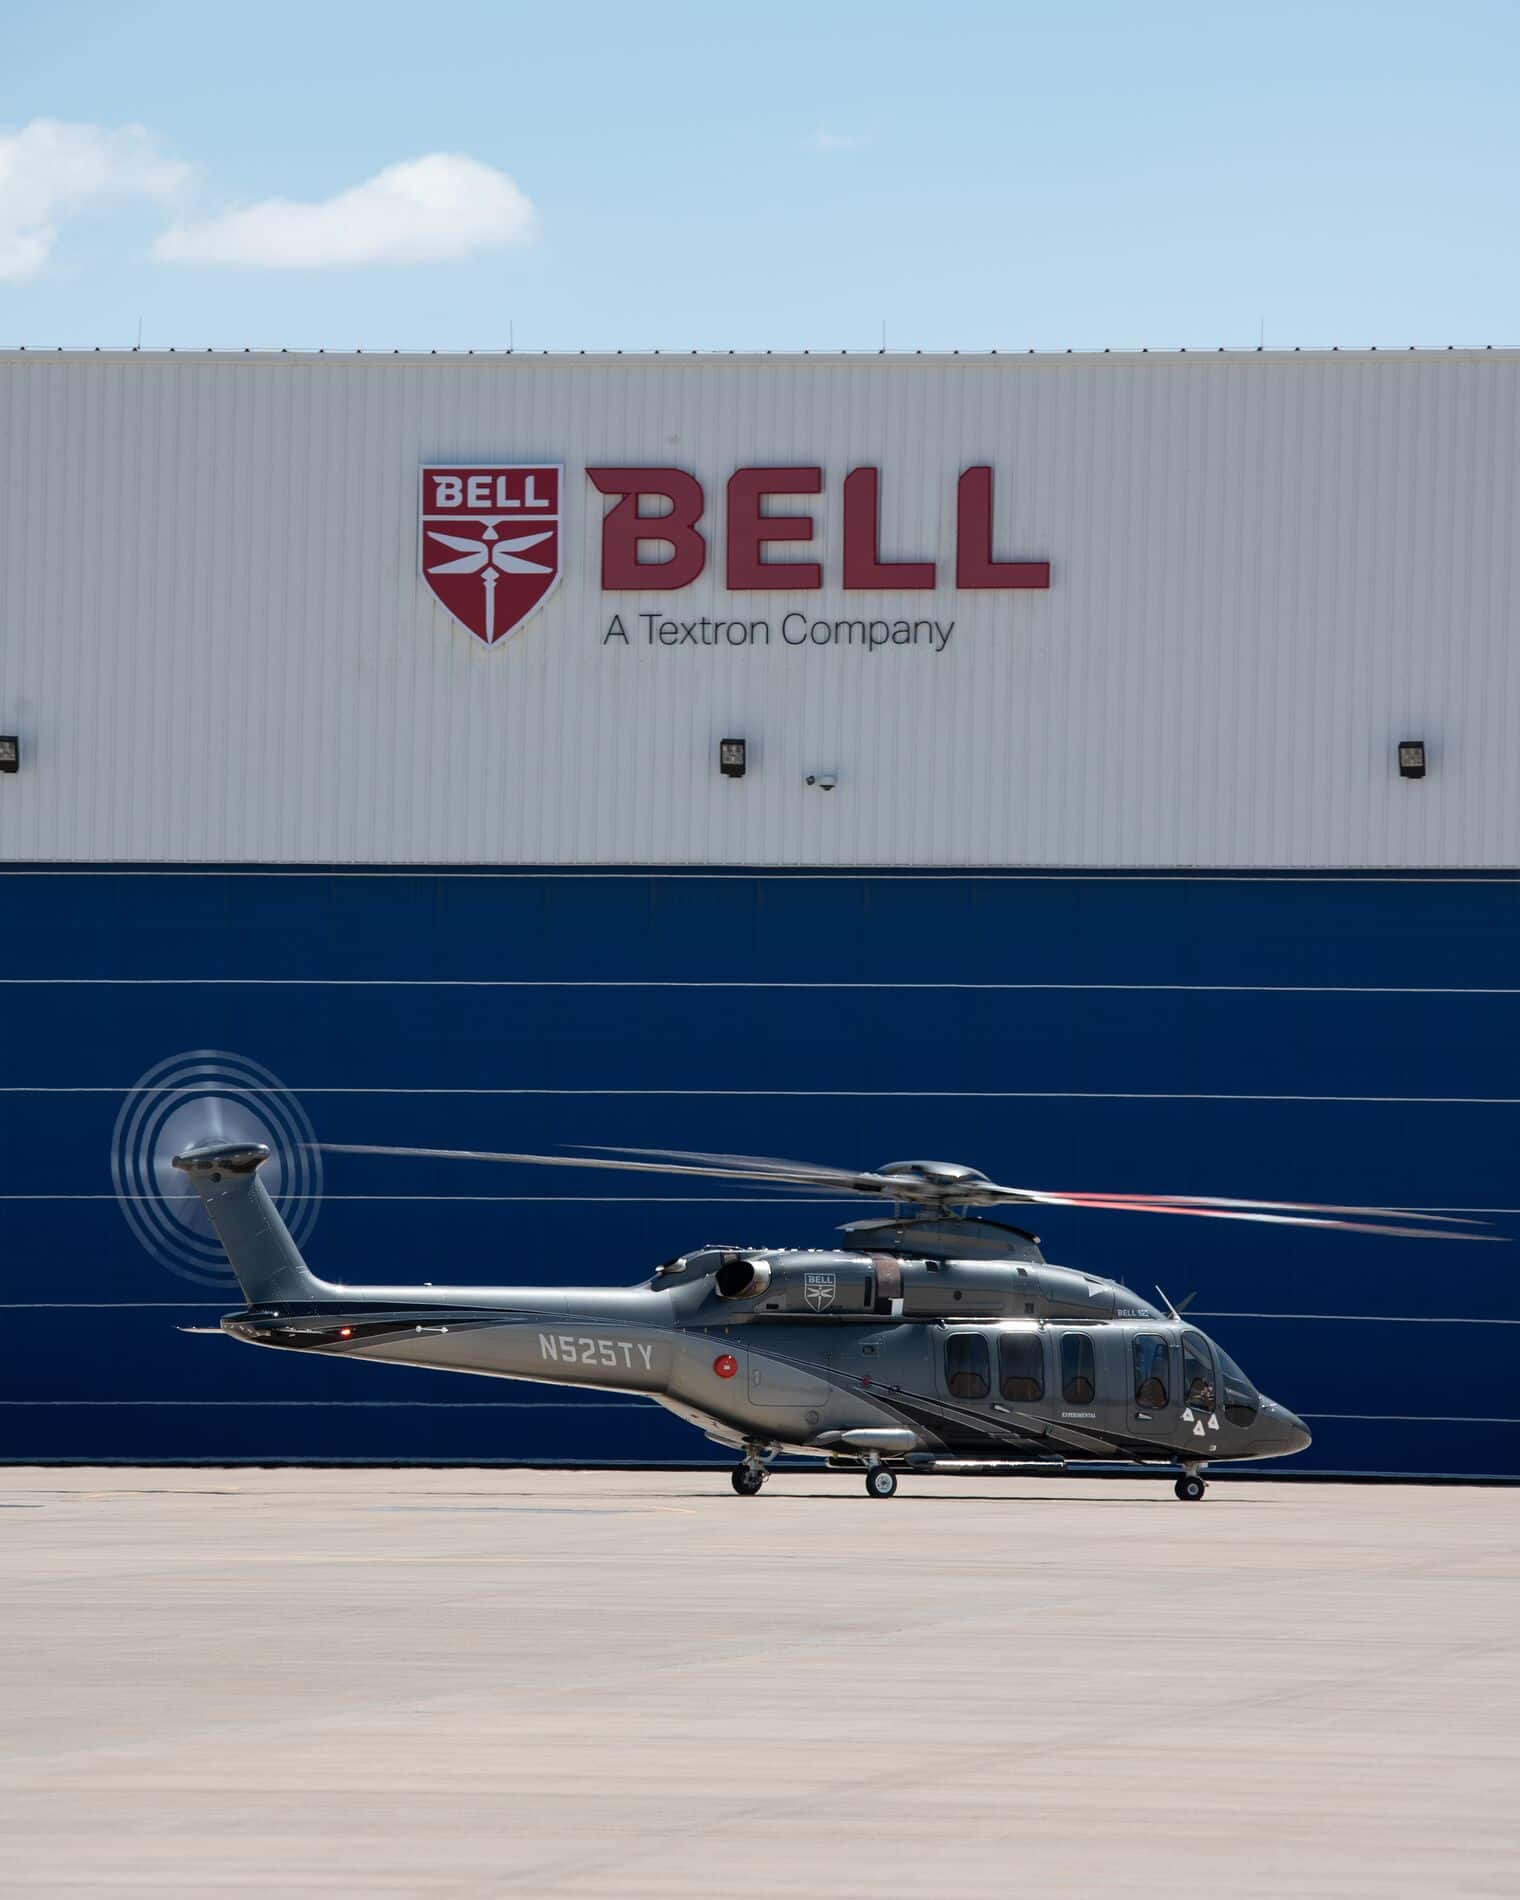 Bell 525 landed at Bell